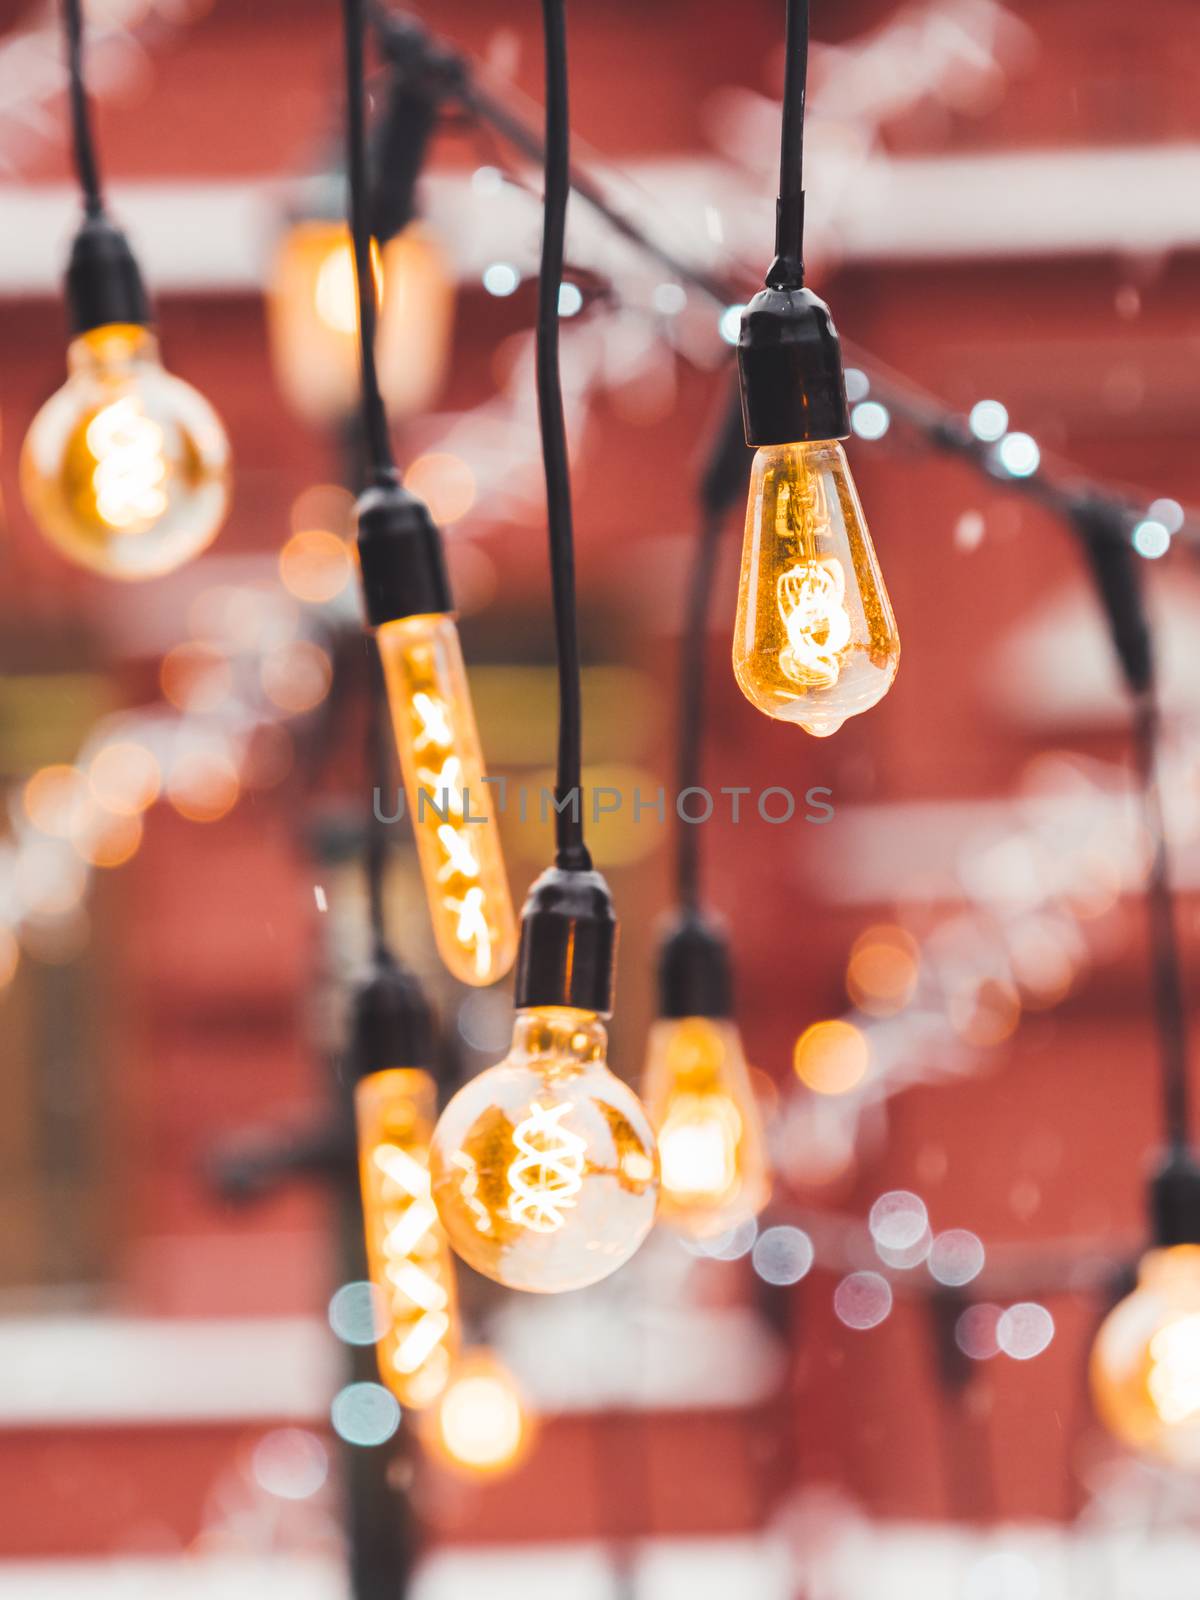 Vintage light bulbs with glow filament. Incandescent retro design. Outdoor decoration for New Year and Christmas celebration. Moscow, Russia.